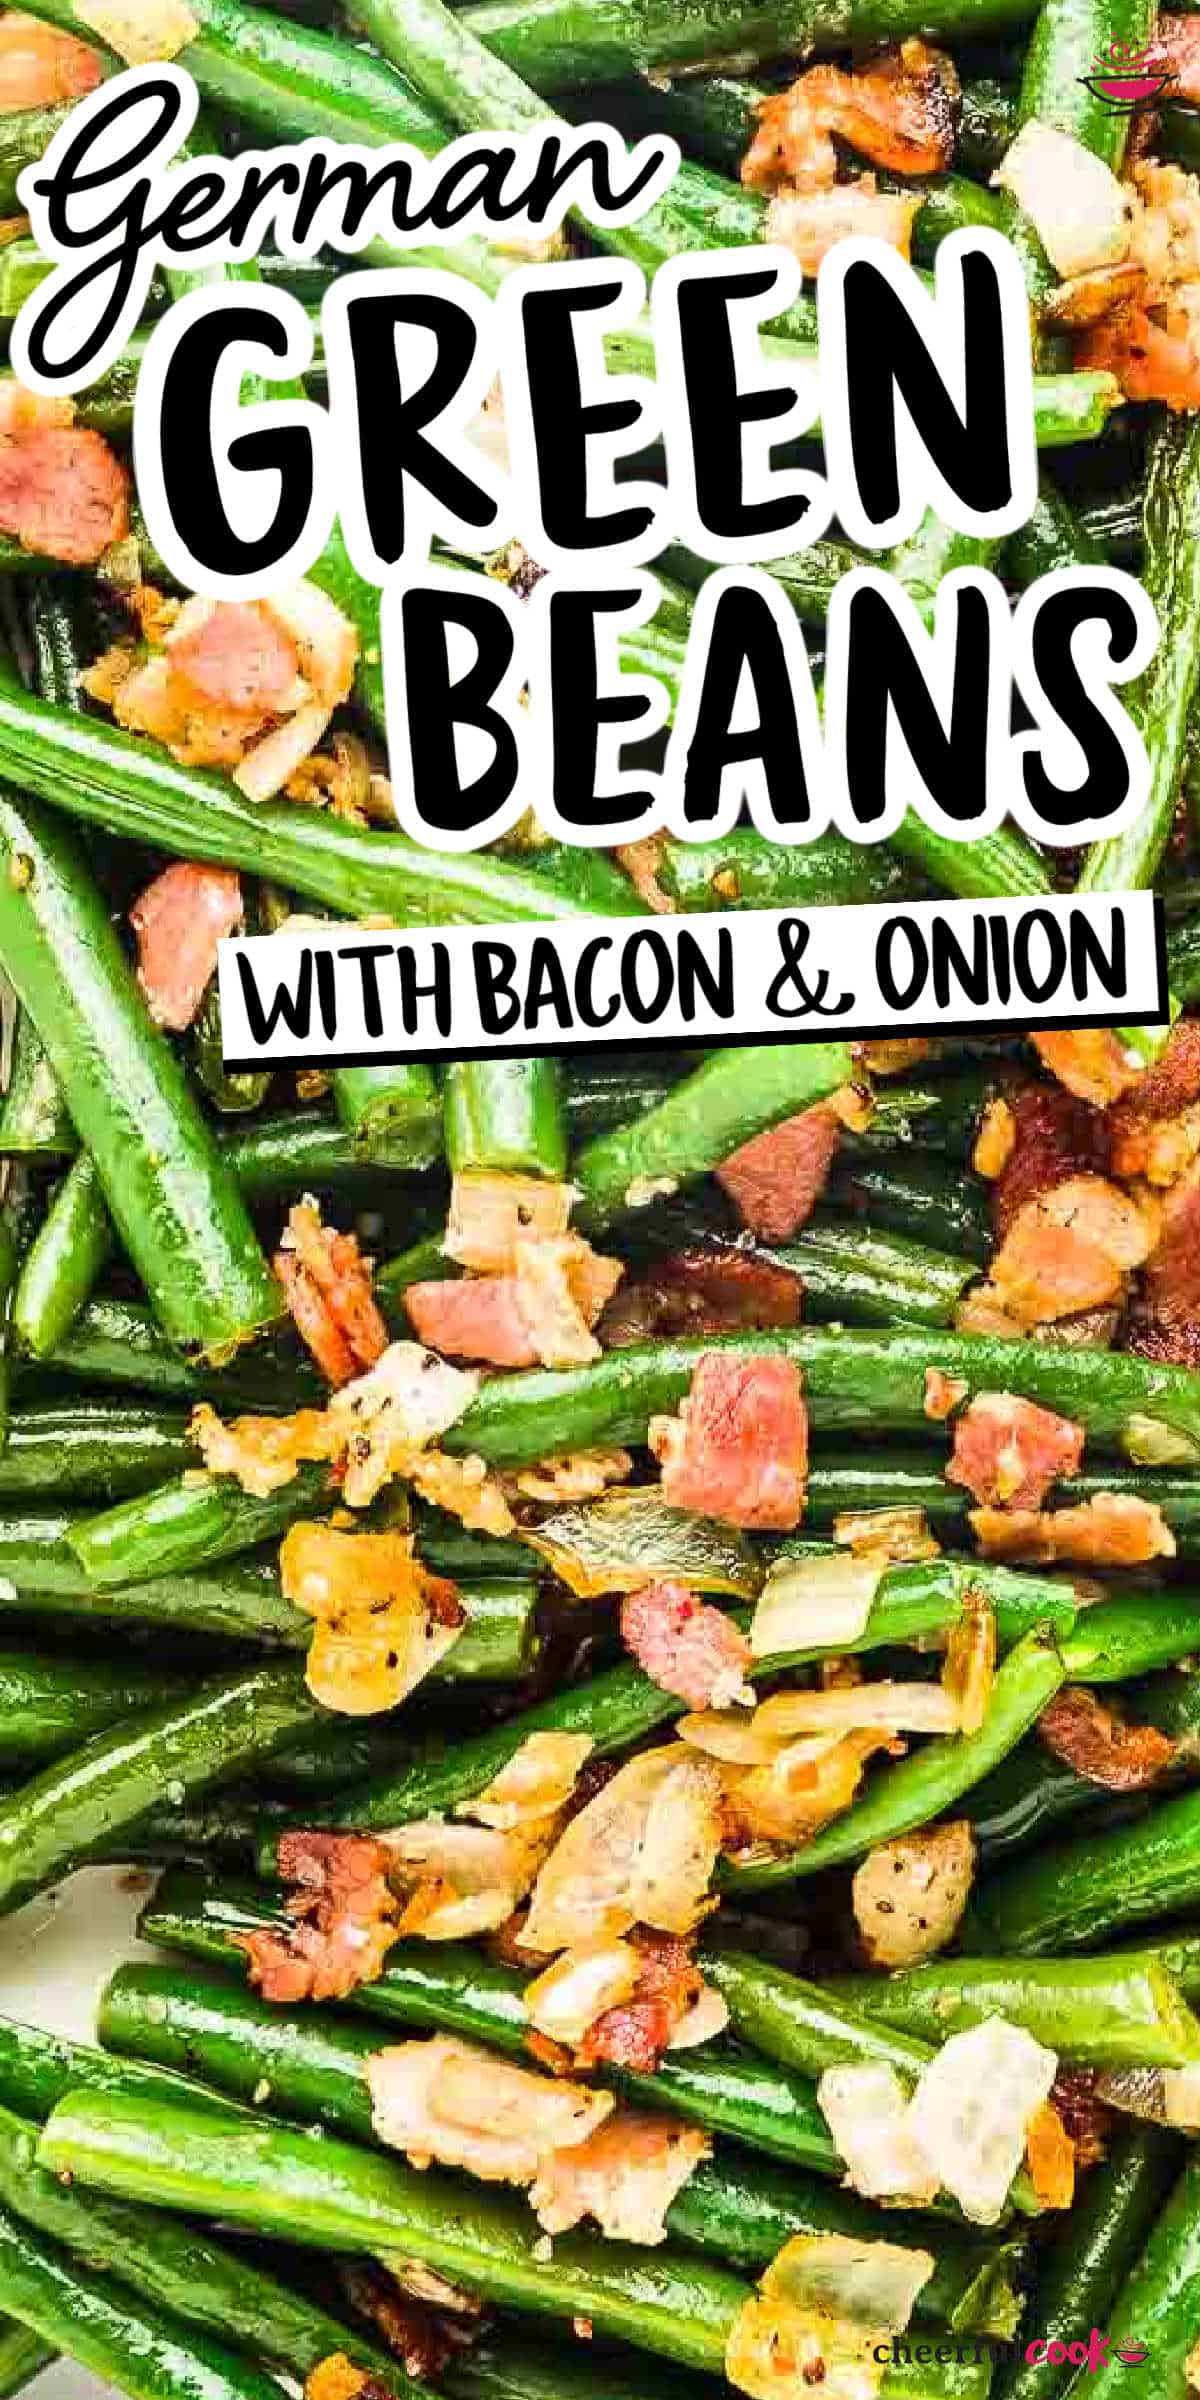 Our Green Beans and bacon side dish is savory, colorful, and requires just 5 simple ingredients! Easy to make and a real family favorite! #cheerfulcook #bacongreenbeans #greenbeans #sauteed #sidedish #recipe #haricotsverts #easy #best #stovetop via @cheerfulcook